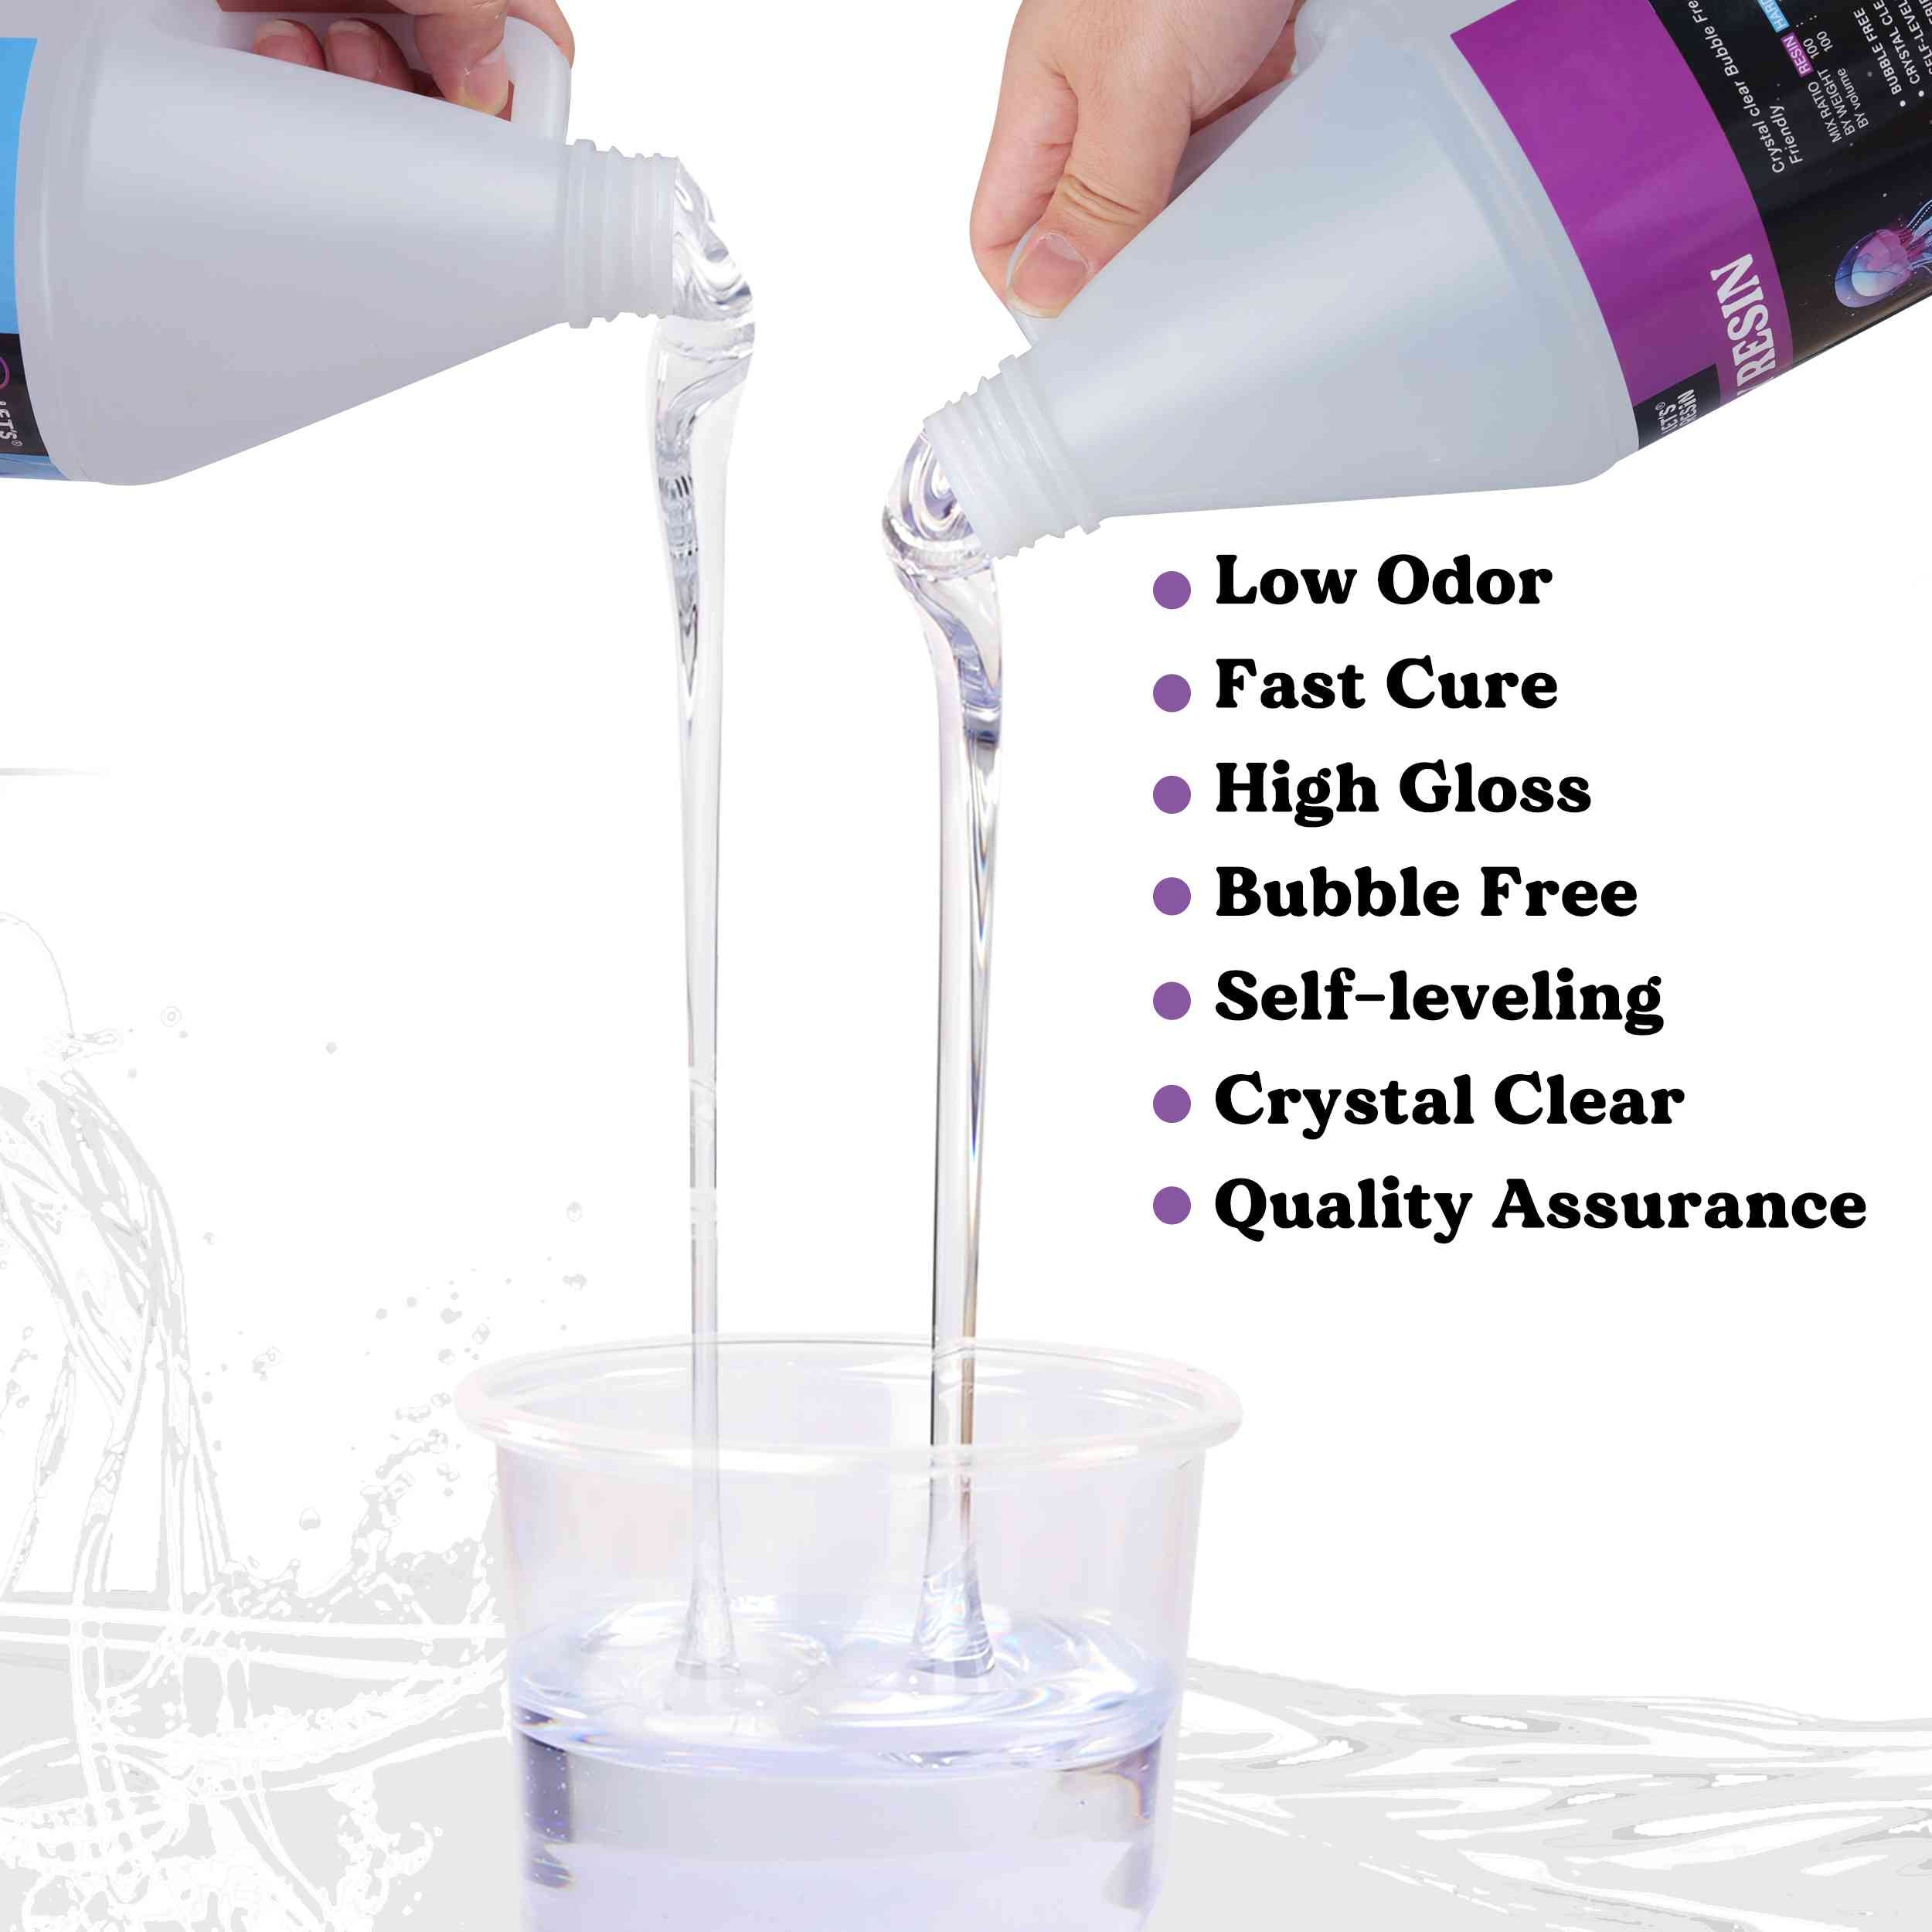 Epoxy Resin 1 Gallon - Crystal Clear Epoxy Resin Kit - Self-Leveling,  High-Glossy, No Yellowing, No Bubbles Casting Resin Perfect for Crafts,  Table